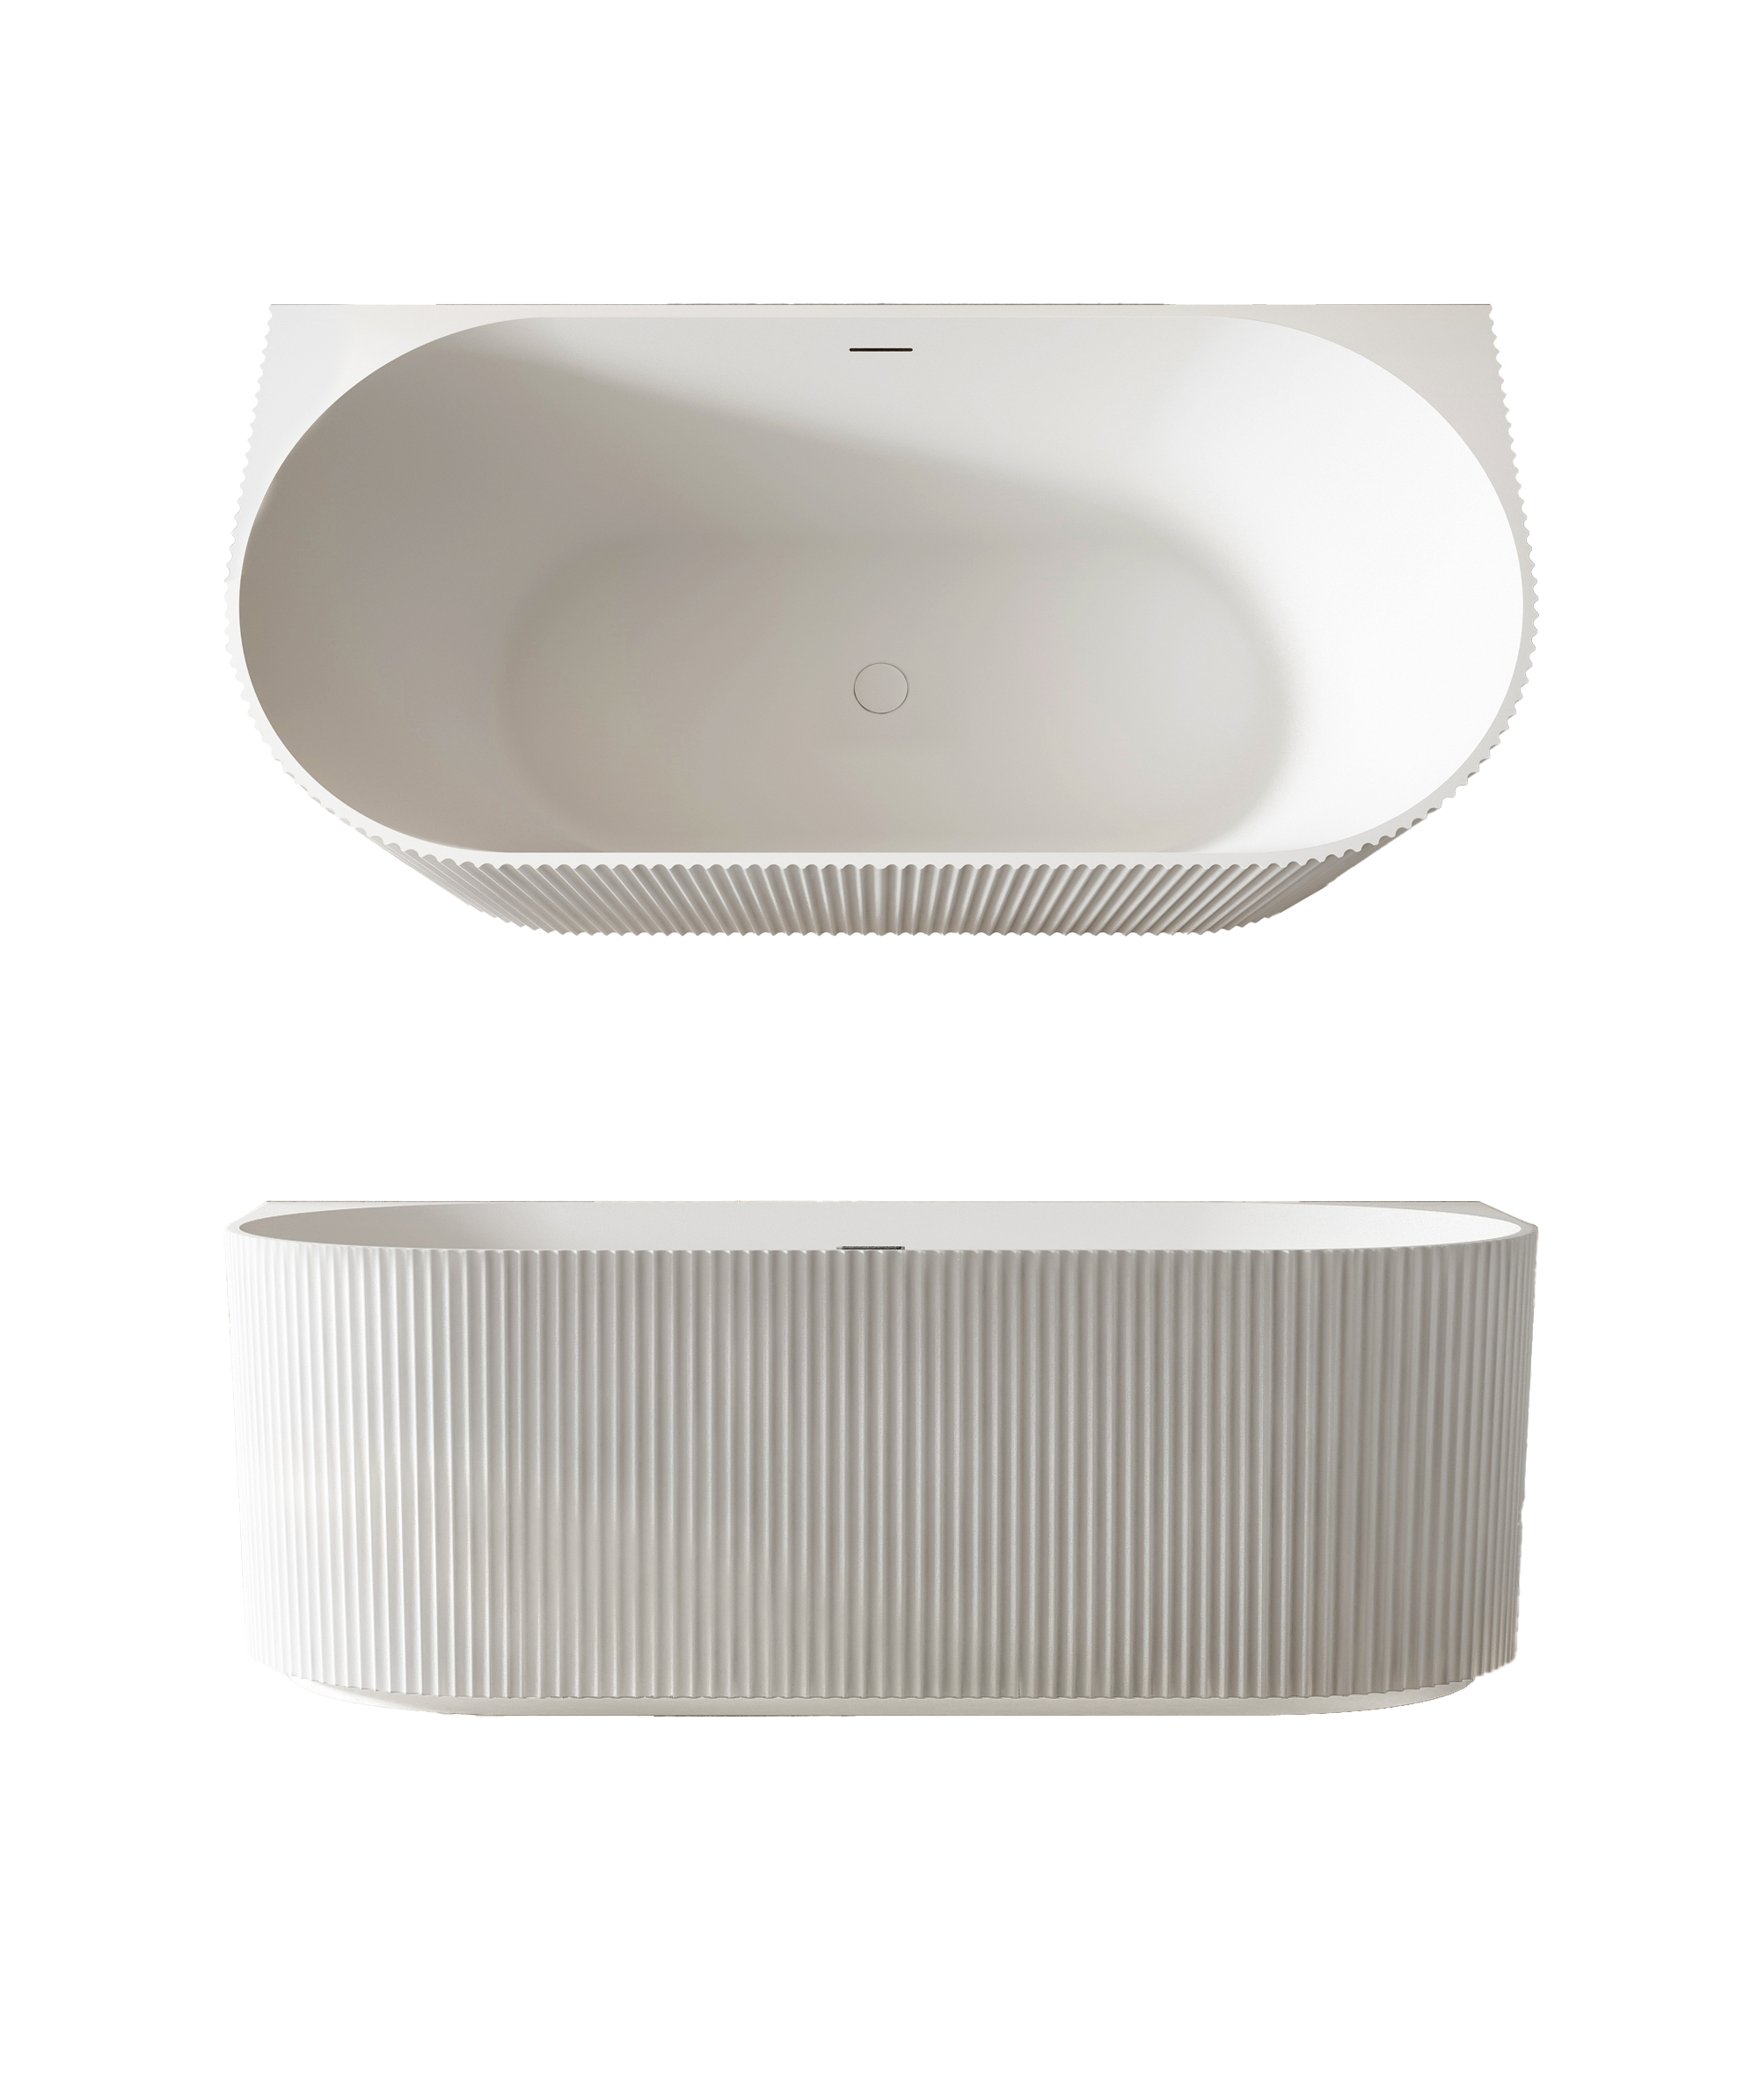 Cleo 115 Fluted Back-to-wall freestanding bath - White Gloss - with integrated slot overflow